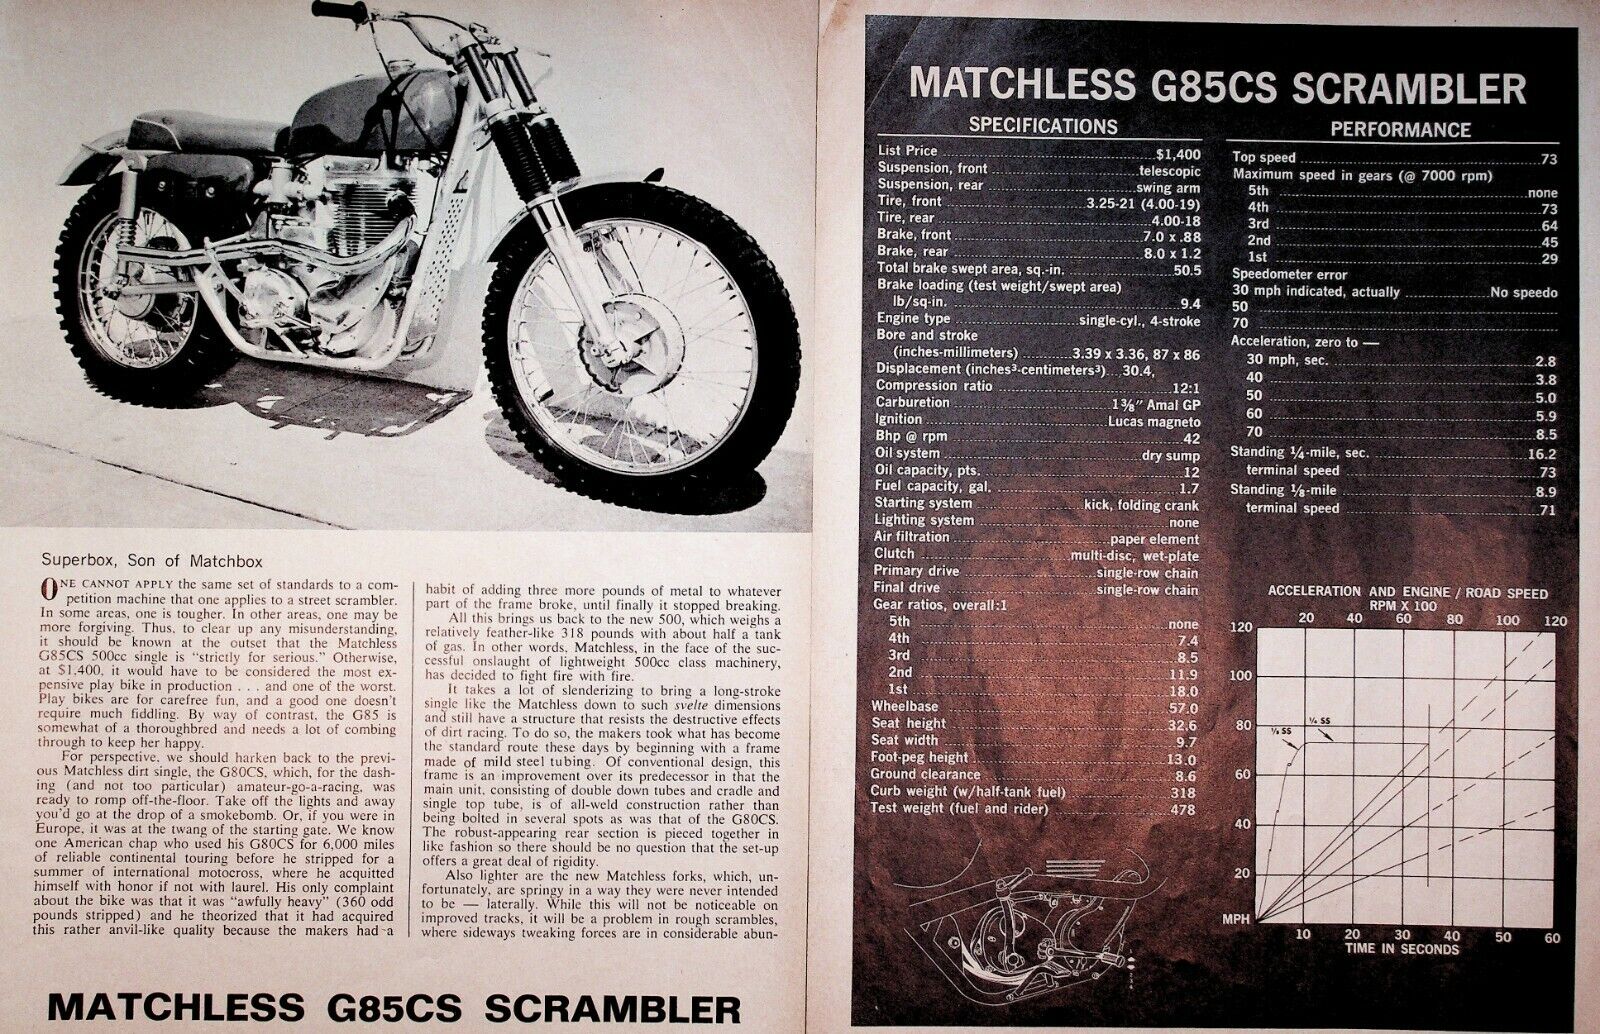 1966 Matchless G85CS Scrambler - 4-Page Vintage Motorcycle Road Test Article